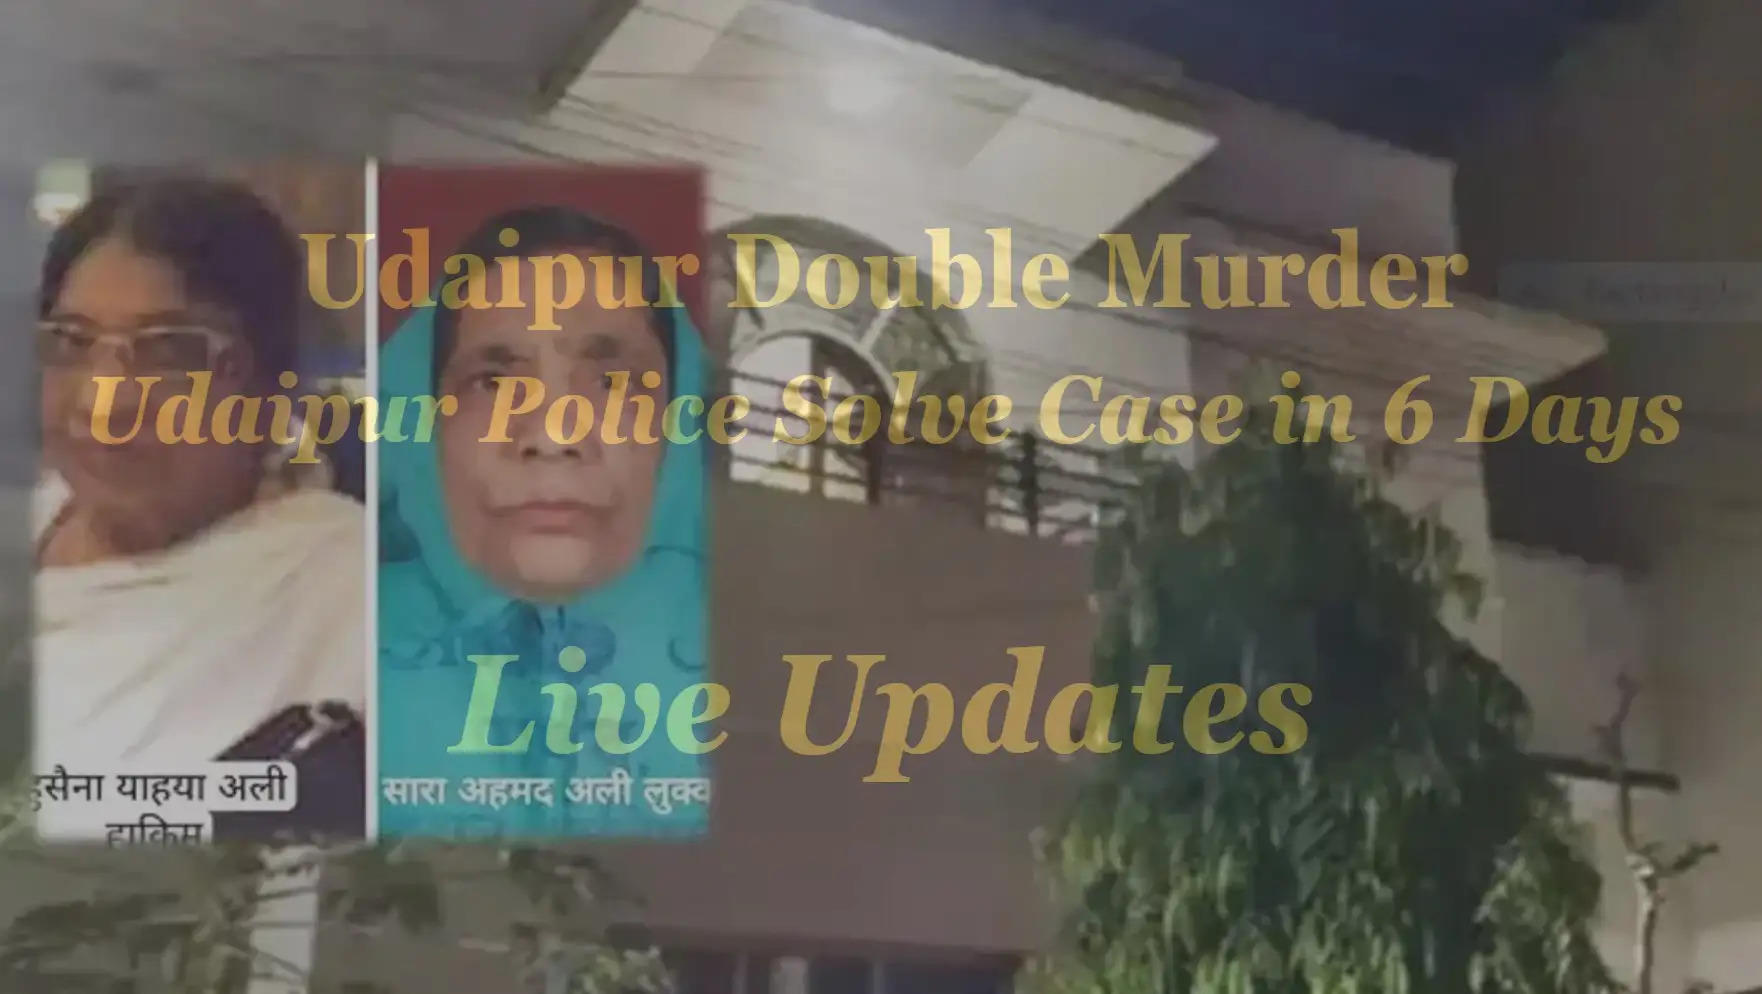 Udaipur Double Murder Case Solved Udaipur Police Solve Double Murder Case in 6 days, Murder committed by relative